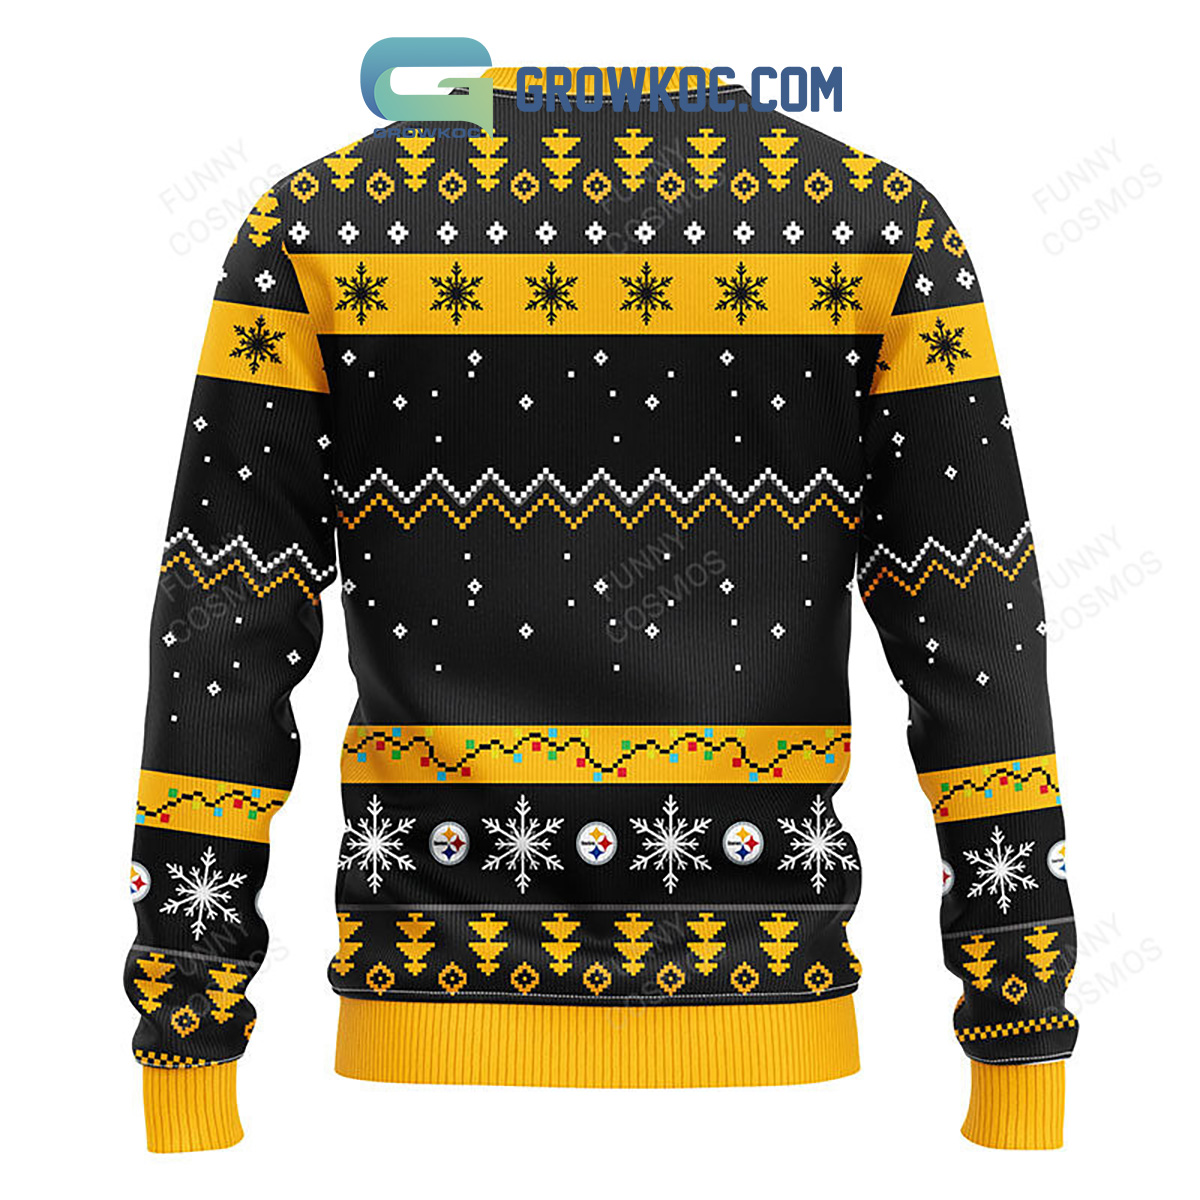 Santa Gold Ugly Christmas Sweater - Trends Bedding